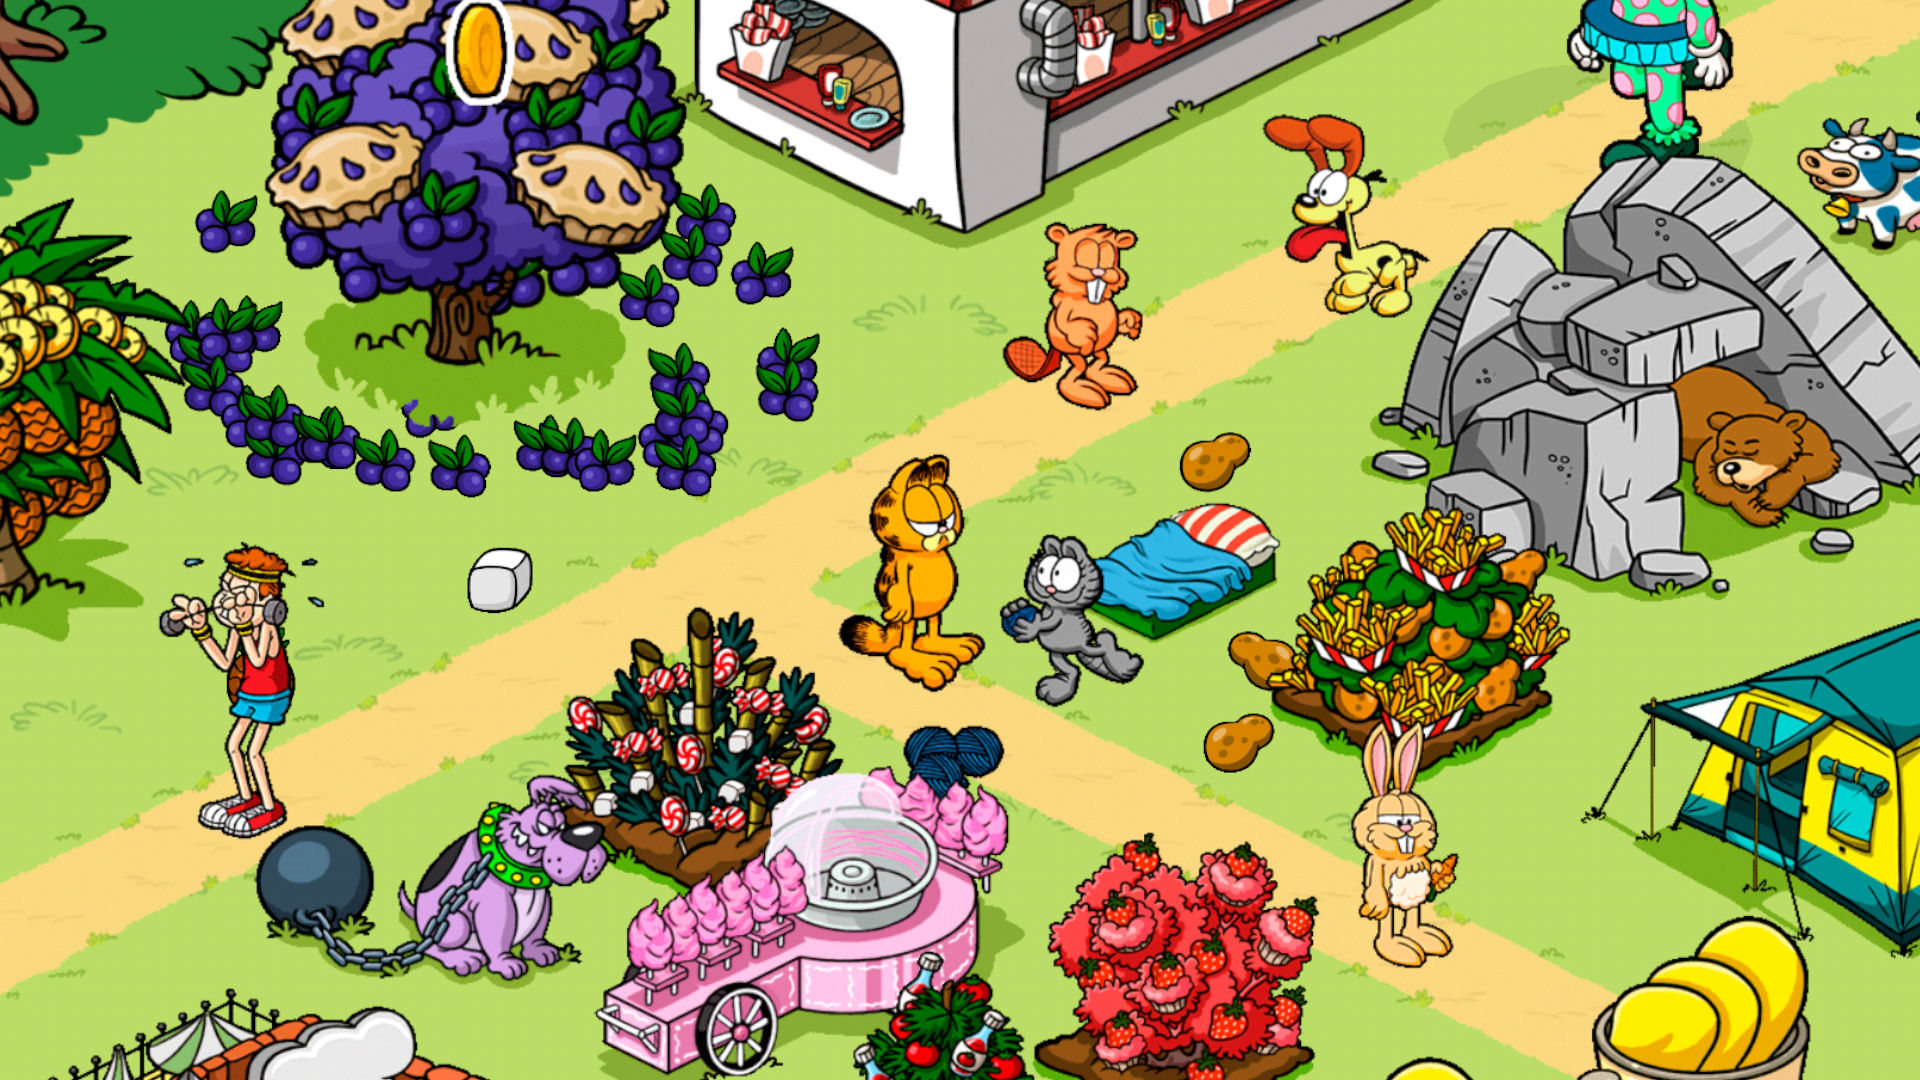 Screenshot of Garfield standing among the action in Garfield Survival of the Fattest for Garfield games guide